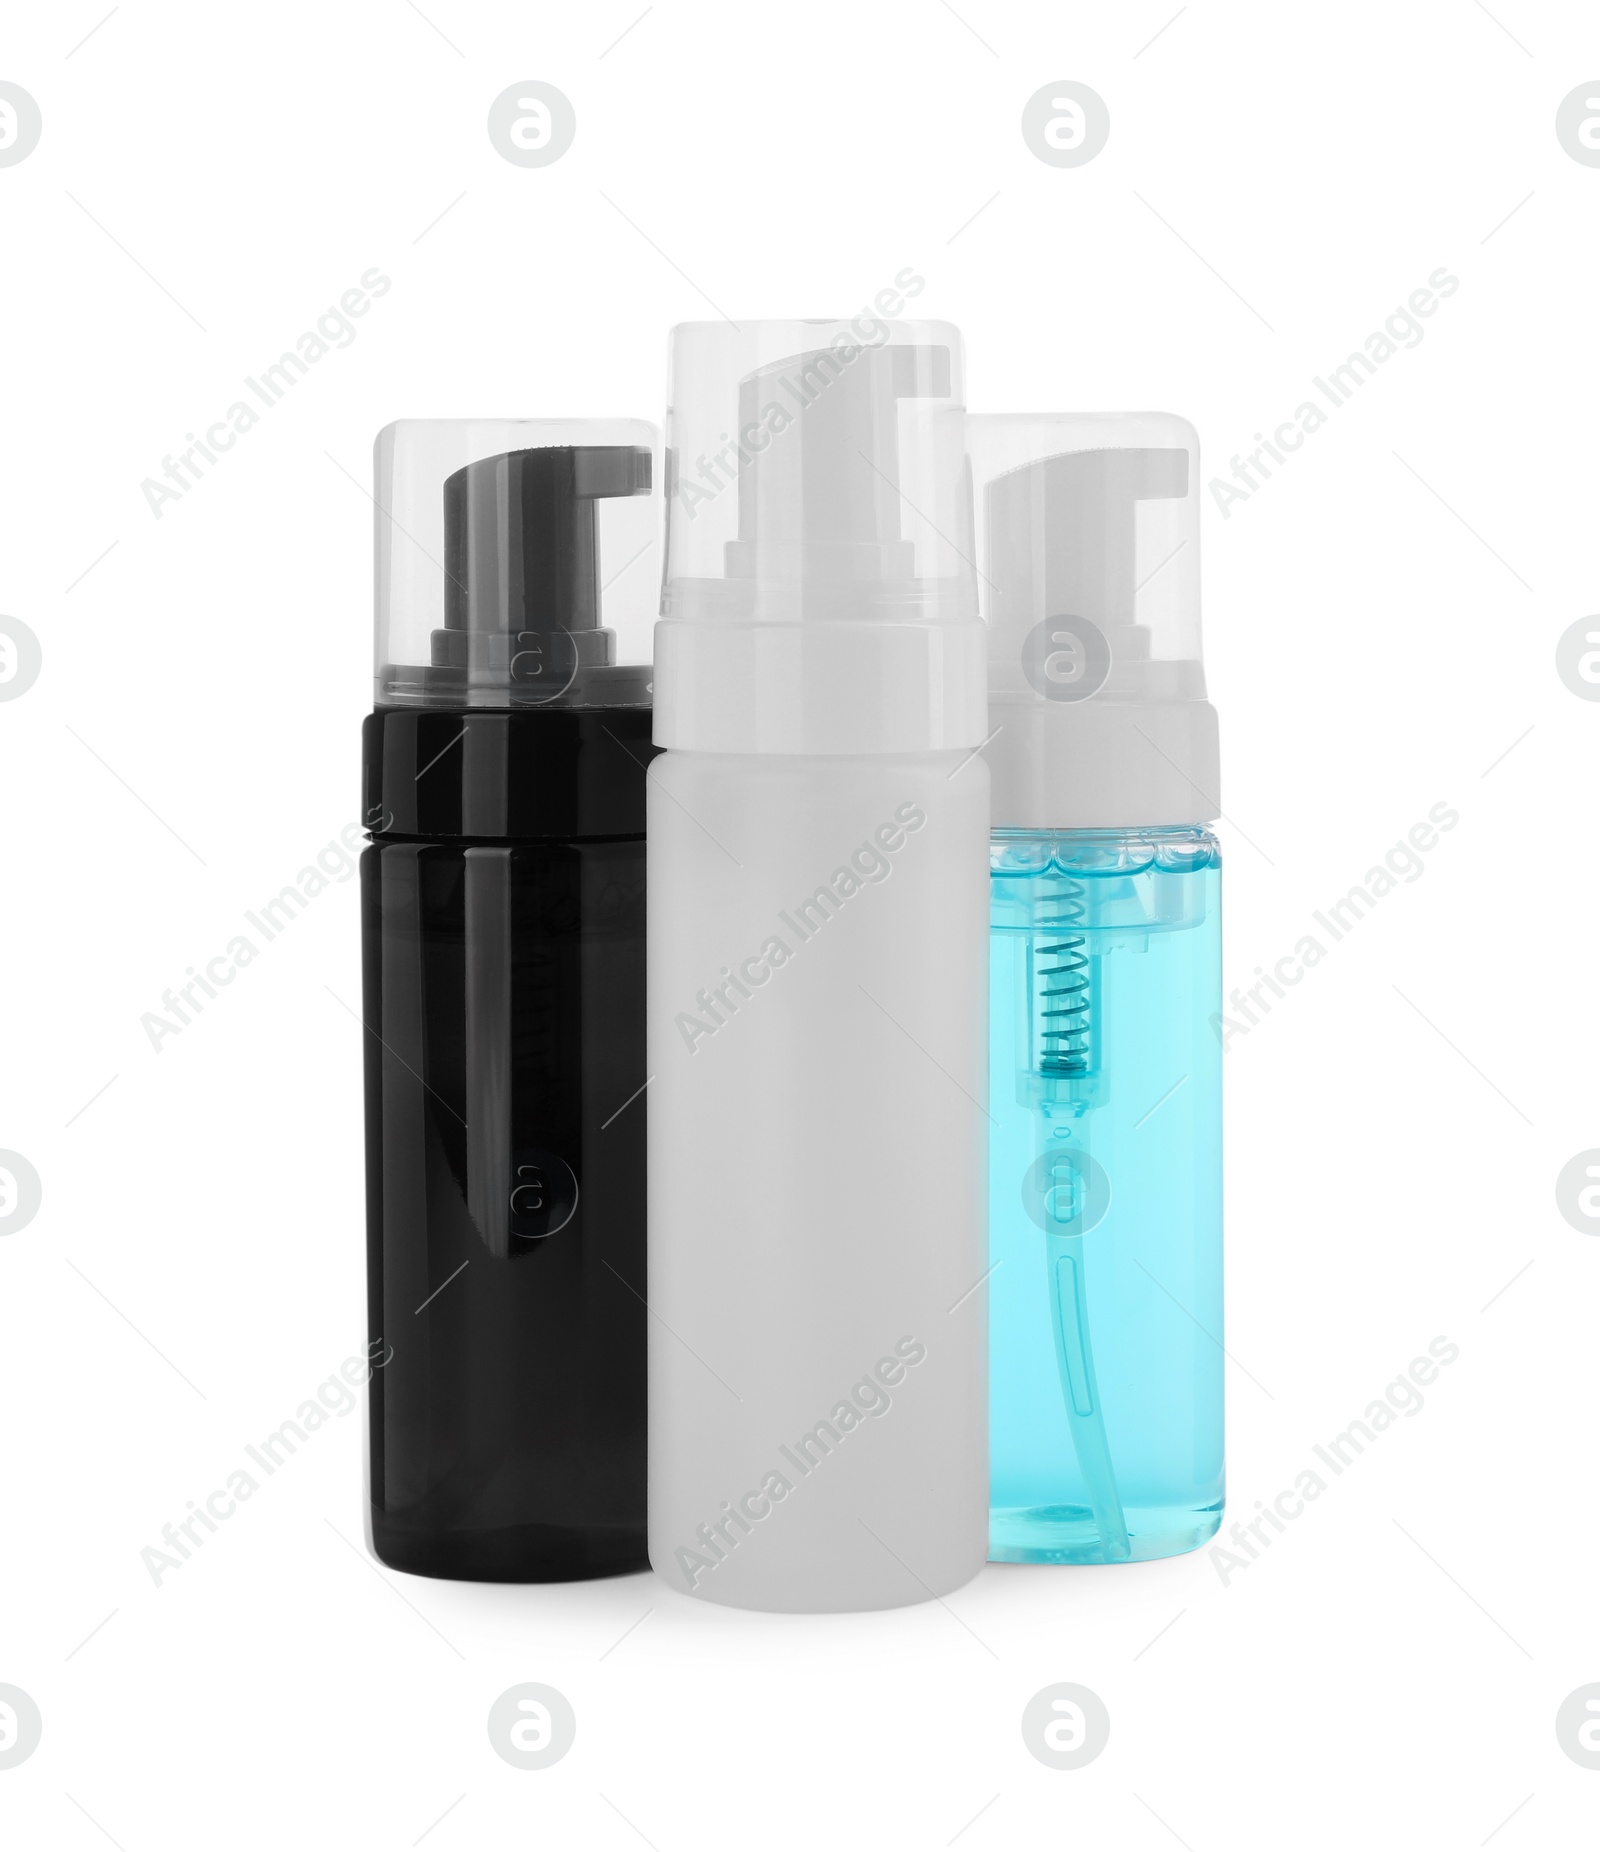 Photo of Different face cleansing products isolated on white